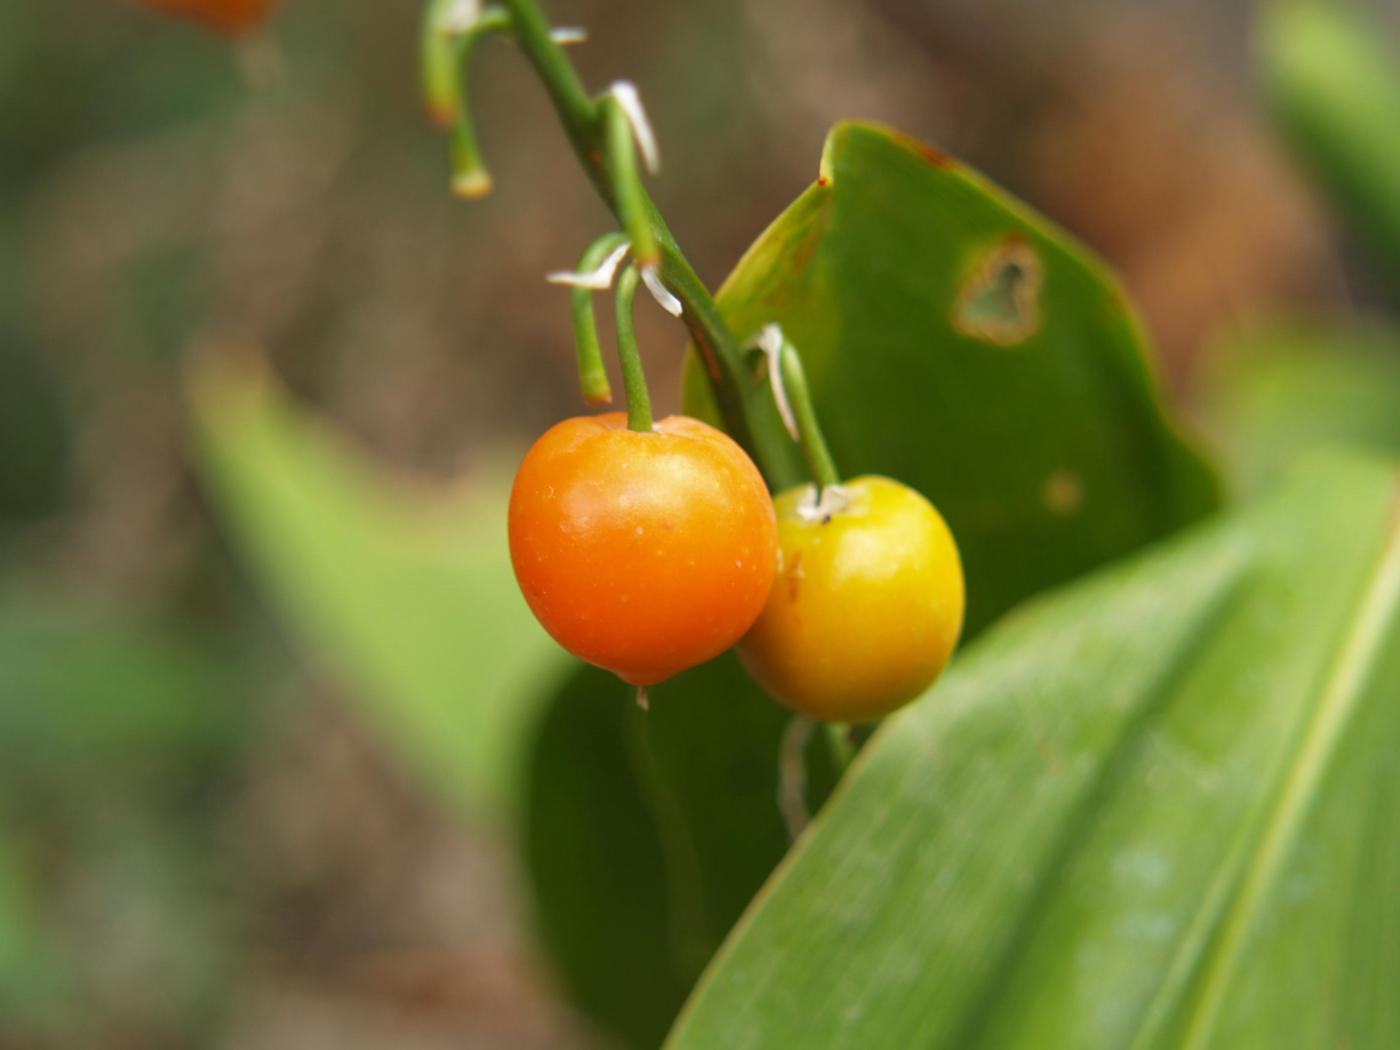 Lily-of-the-valley fruit